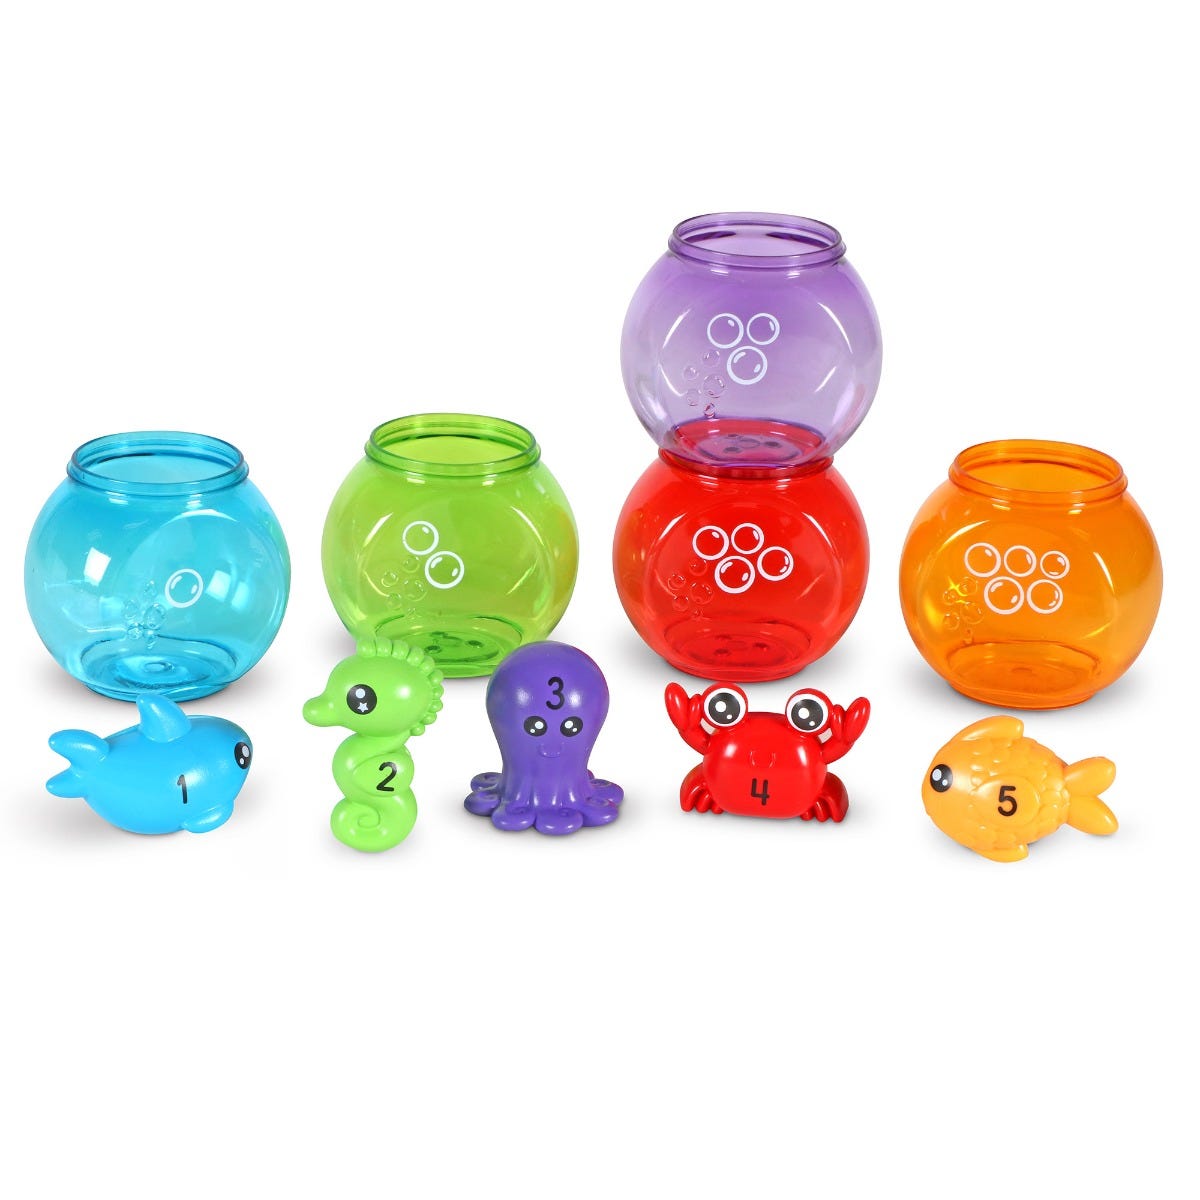 Peekaboo Fishbowl Friends, Introducing the Peekaboo Fishbowl Friends, a set of toddler toys designed to promote early learning in a fun and interactive way. With these friendly sea creatures, little ones can engage in activities that enhance their counting, colors, matching, and fine motor skills.Each Peekaboo Fishbowl Friends set includes five translucent fishbowls, each coming in a different vibrant color. These visually appealing fishbowls immediately catch the attention of young minds. Inside each bowl,